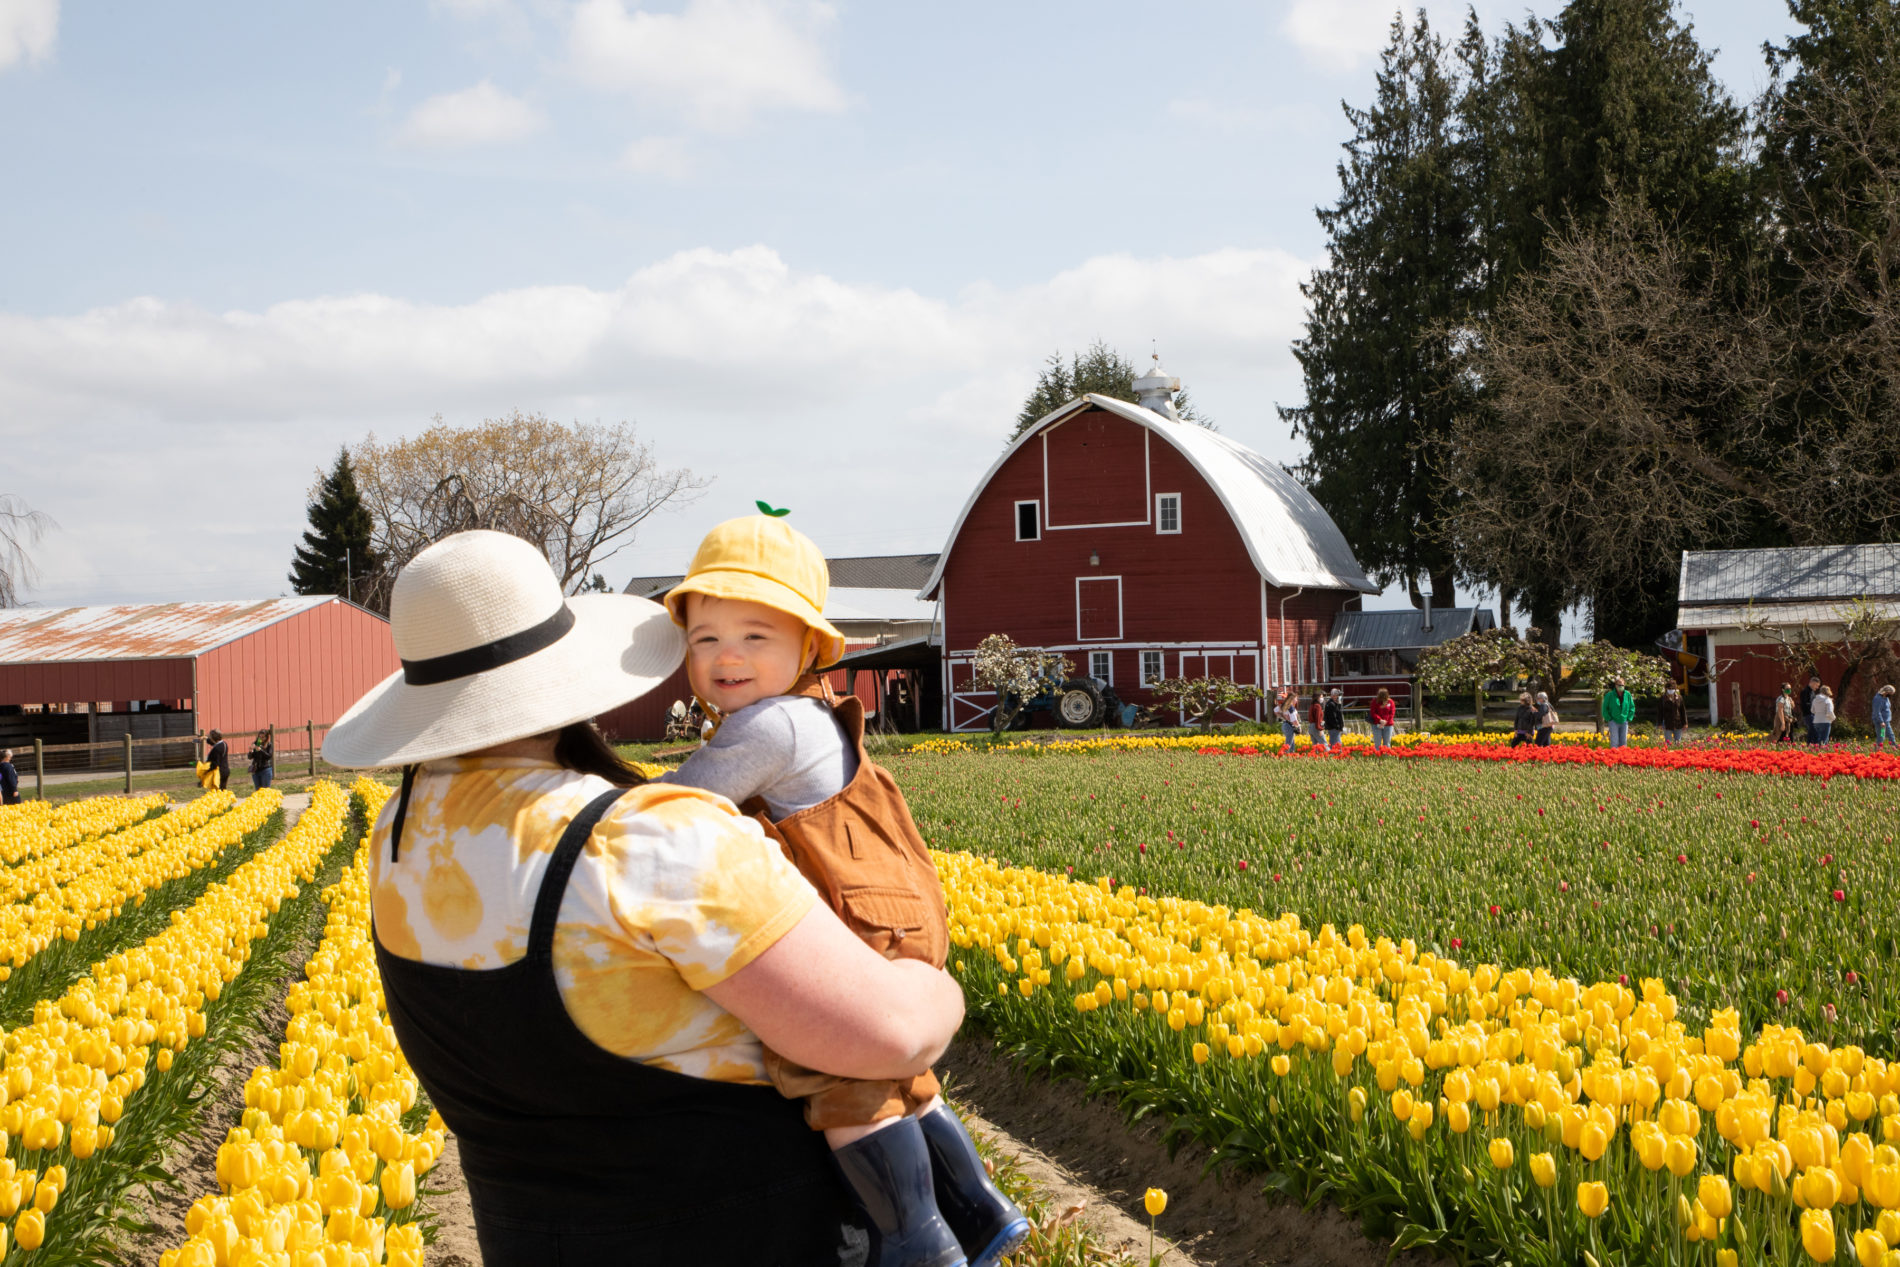 Mother and baby wearing farmers outfits for photography in the tulip fields.